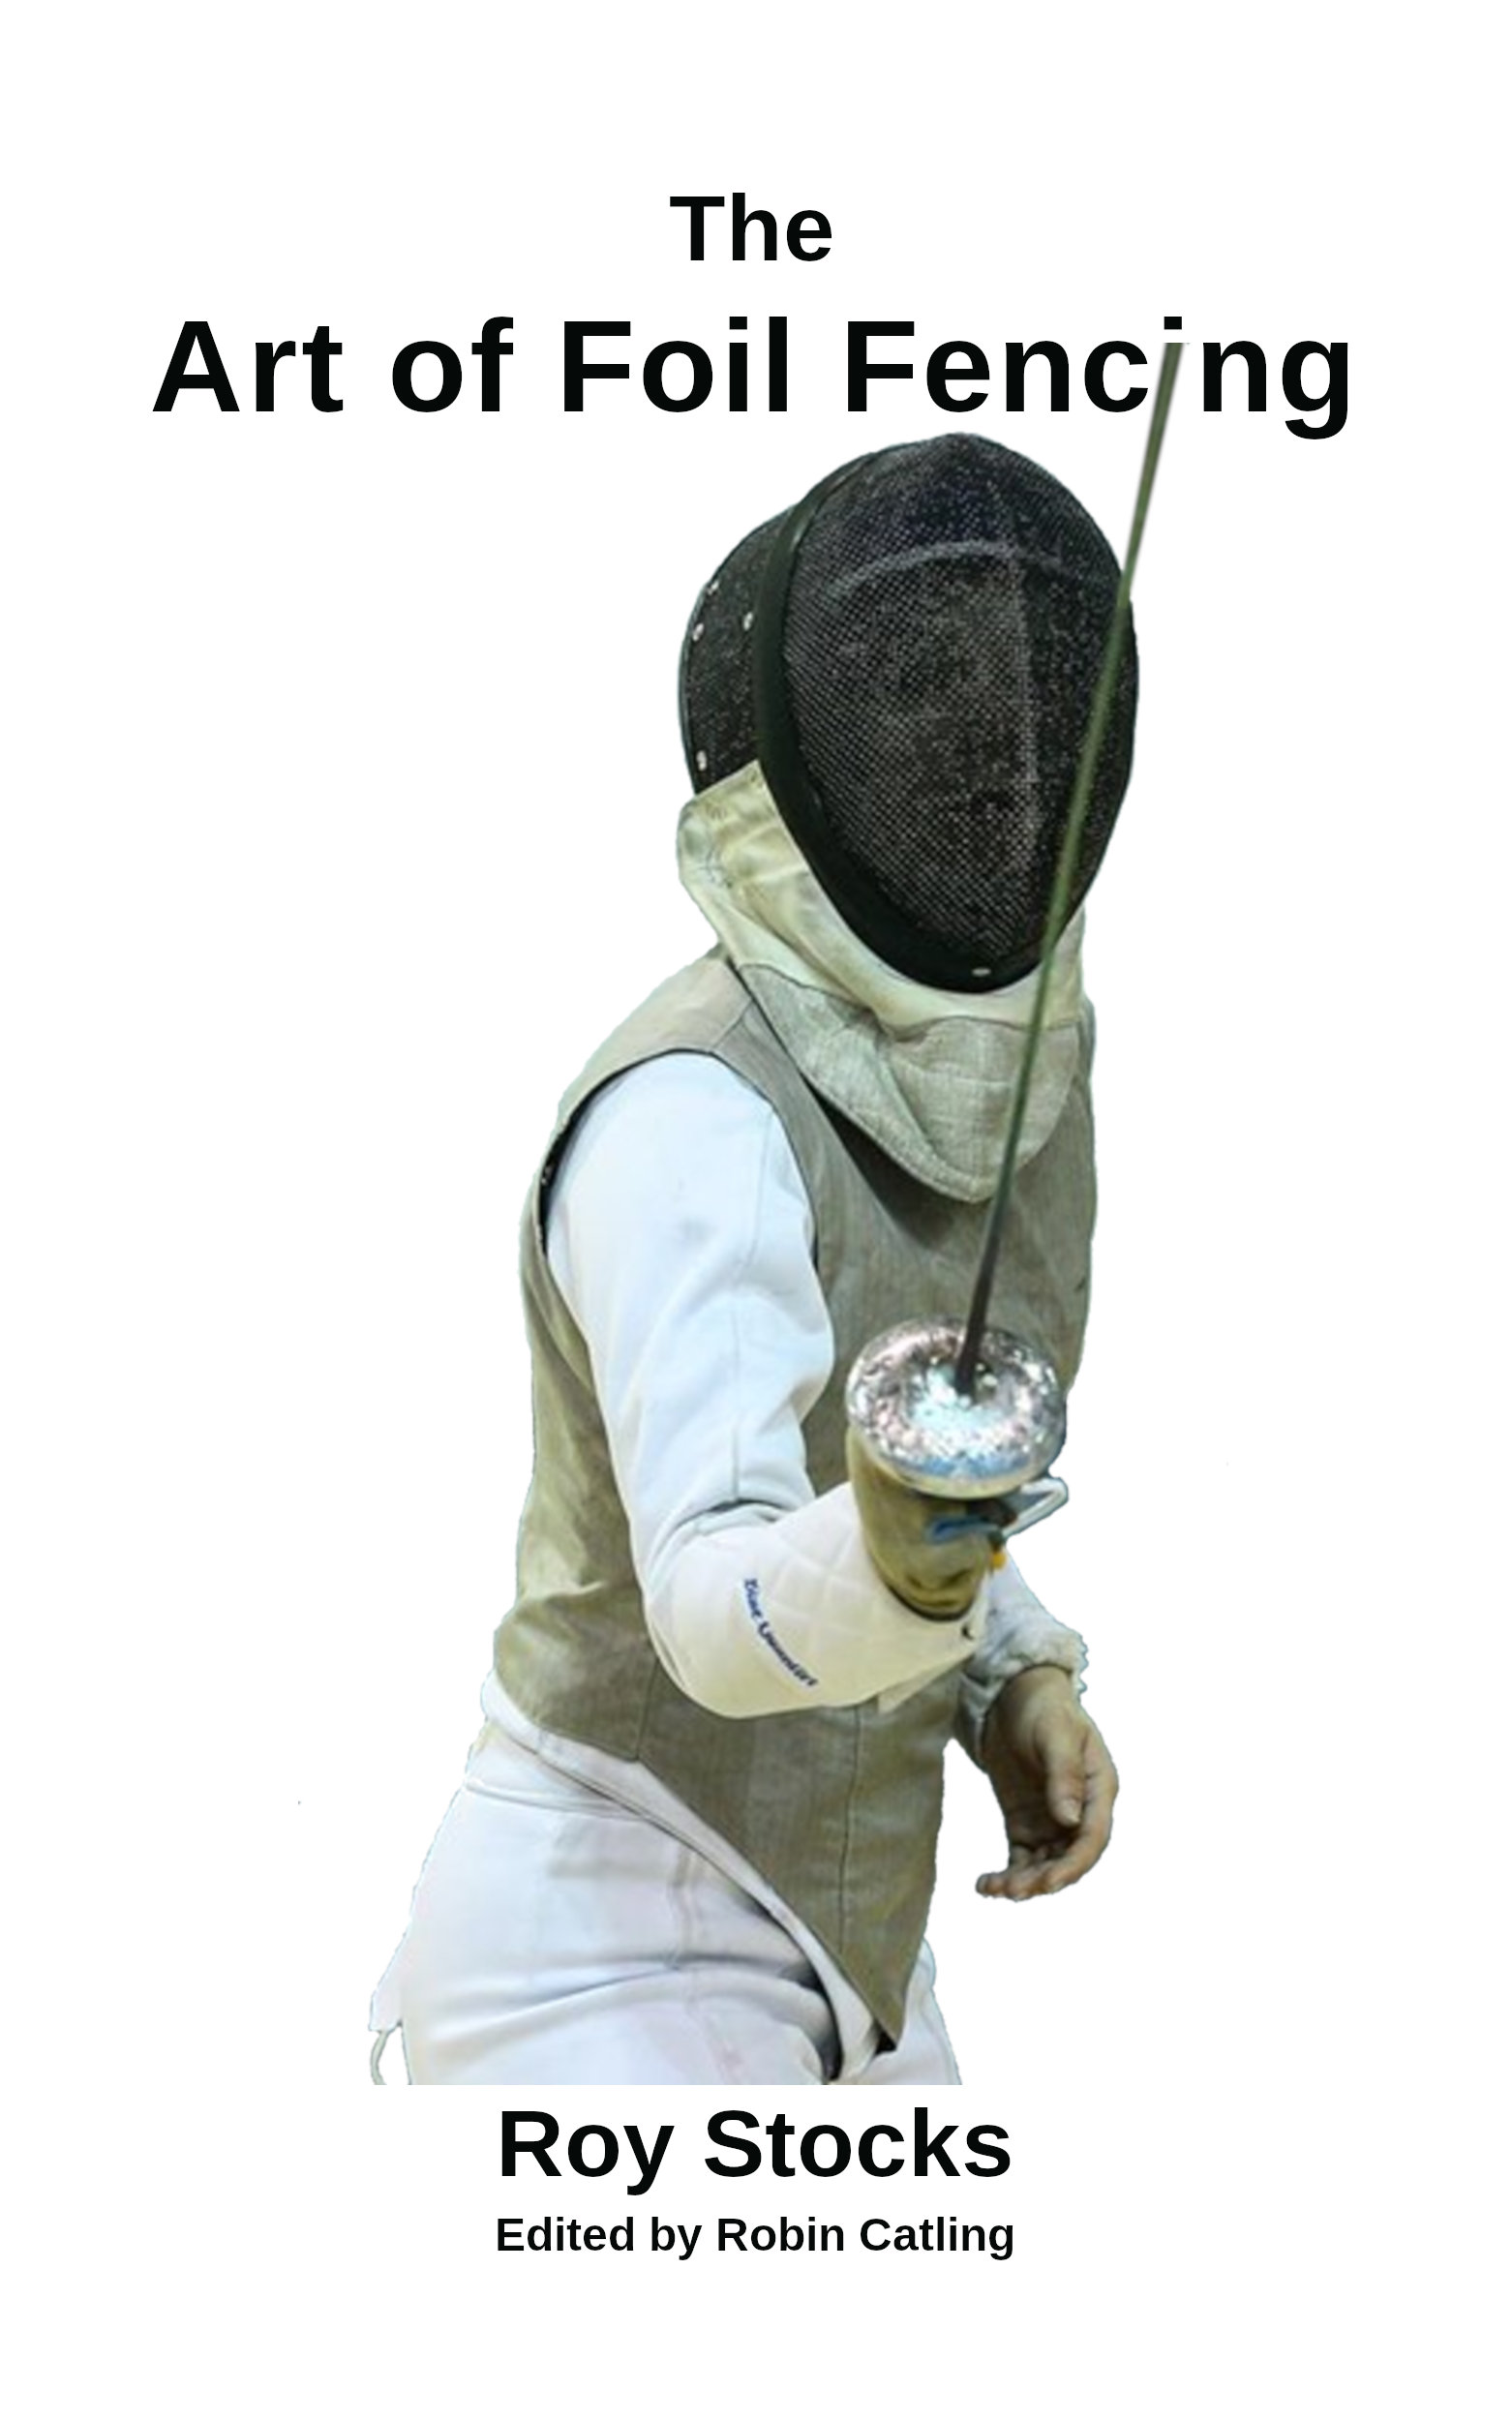 FREE: The Art of Foil Fencing by Roy Stocks, edited by Robin Catling